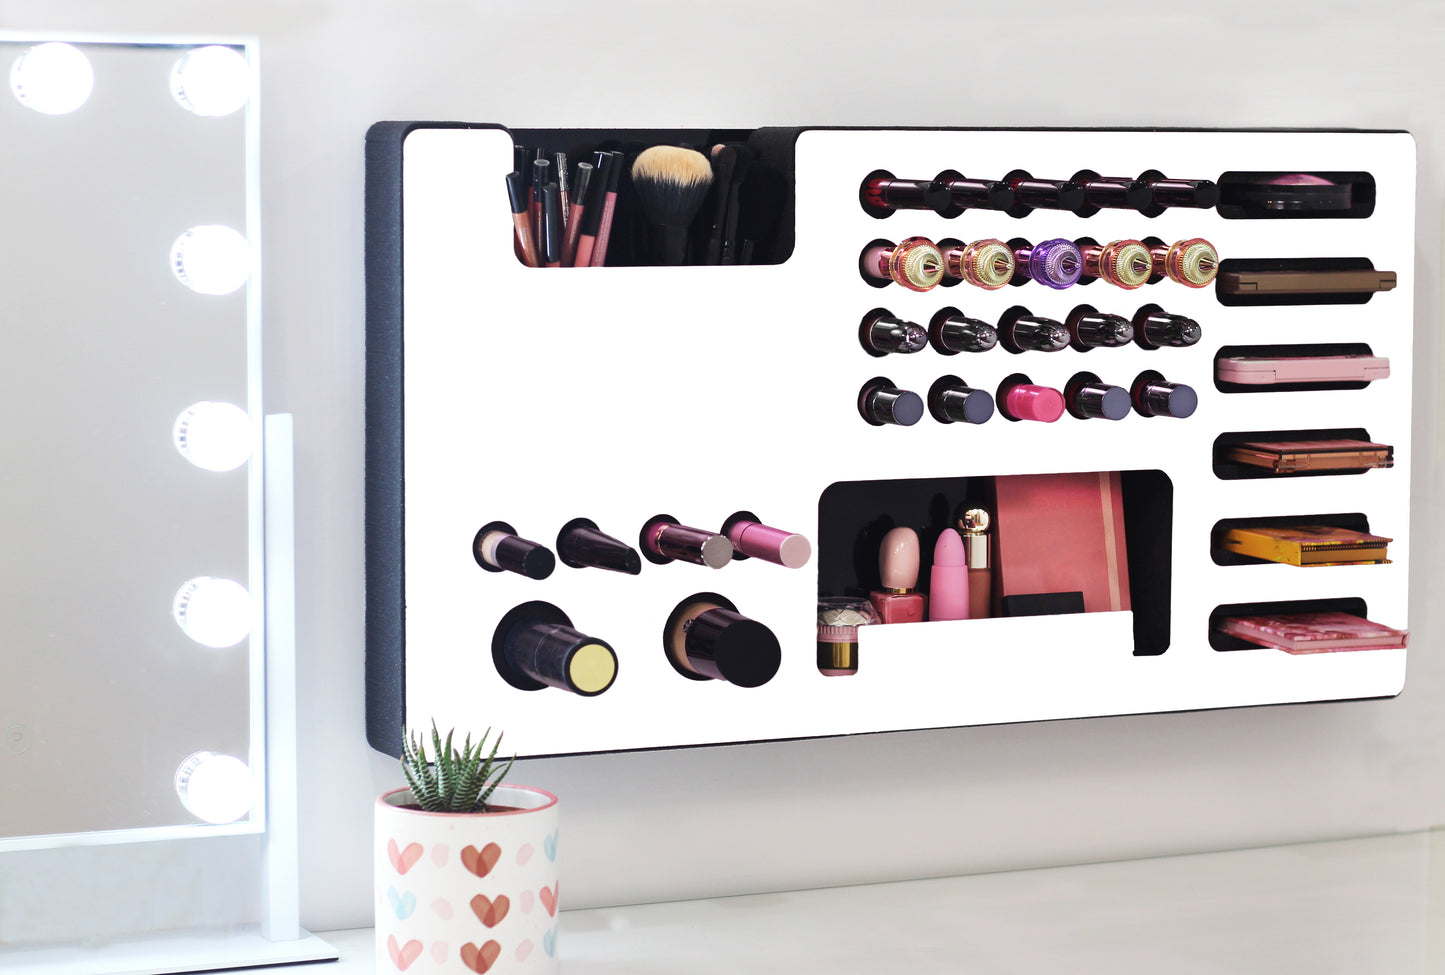 White Ultra Complete Makeup Solution Organizer shown mounted on the wall holding lipsticks, lip glosses, nail polishes, brushes, sunglasses and more by keeping items accessible and off of the counter. Shown next to a makeup vanity with samples of suggested items the organizer can hold. Tilted to the right to show the wall mounted makeup organizer at a different angle while still on the wall.